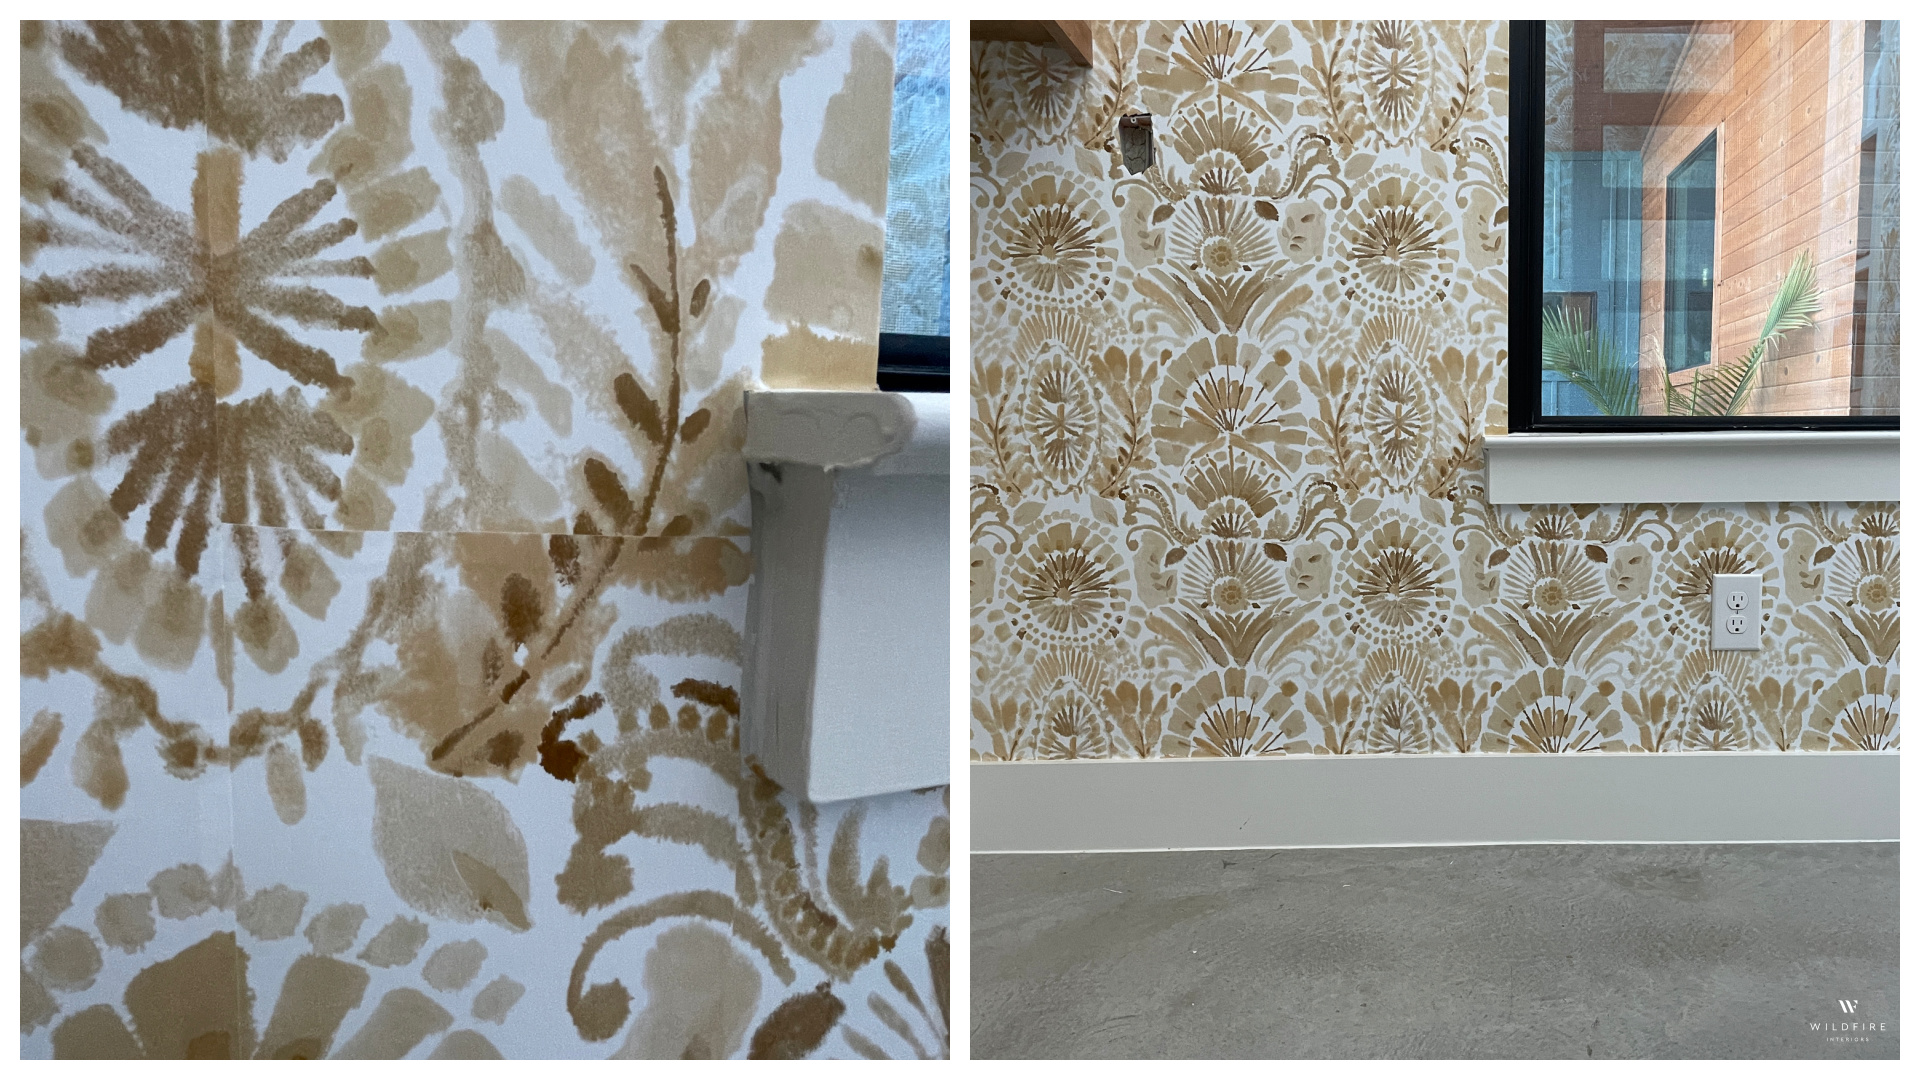 This is why using busy, abstract pattern when hanging wallpaper is a good idea, especially if it is your first time. If you mess up, is disappears when you stand back a few feet. 